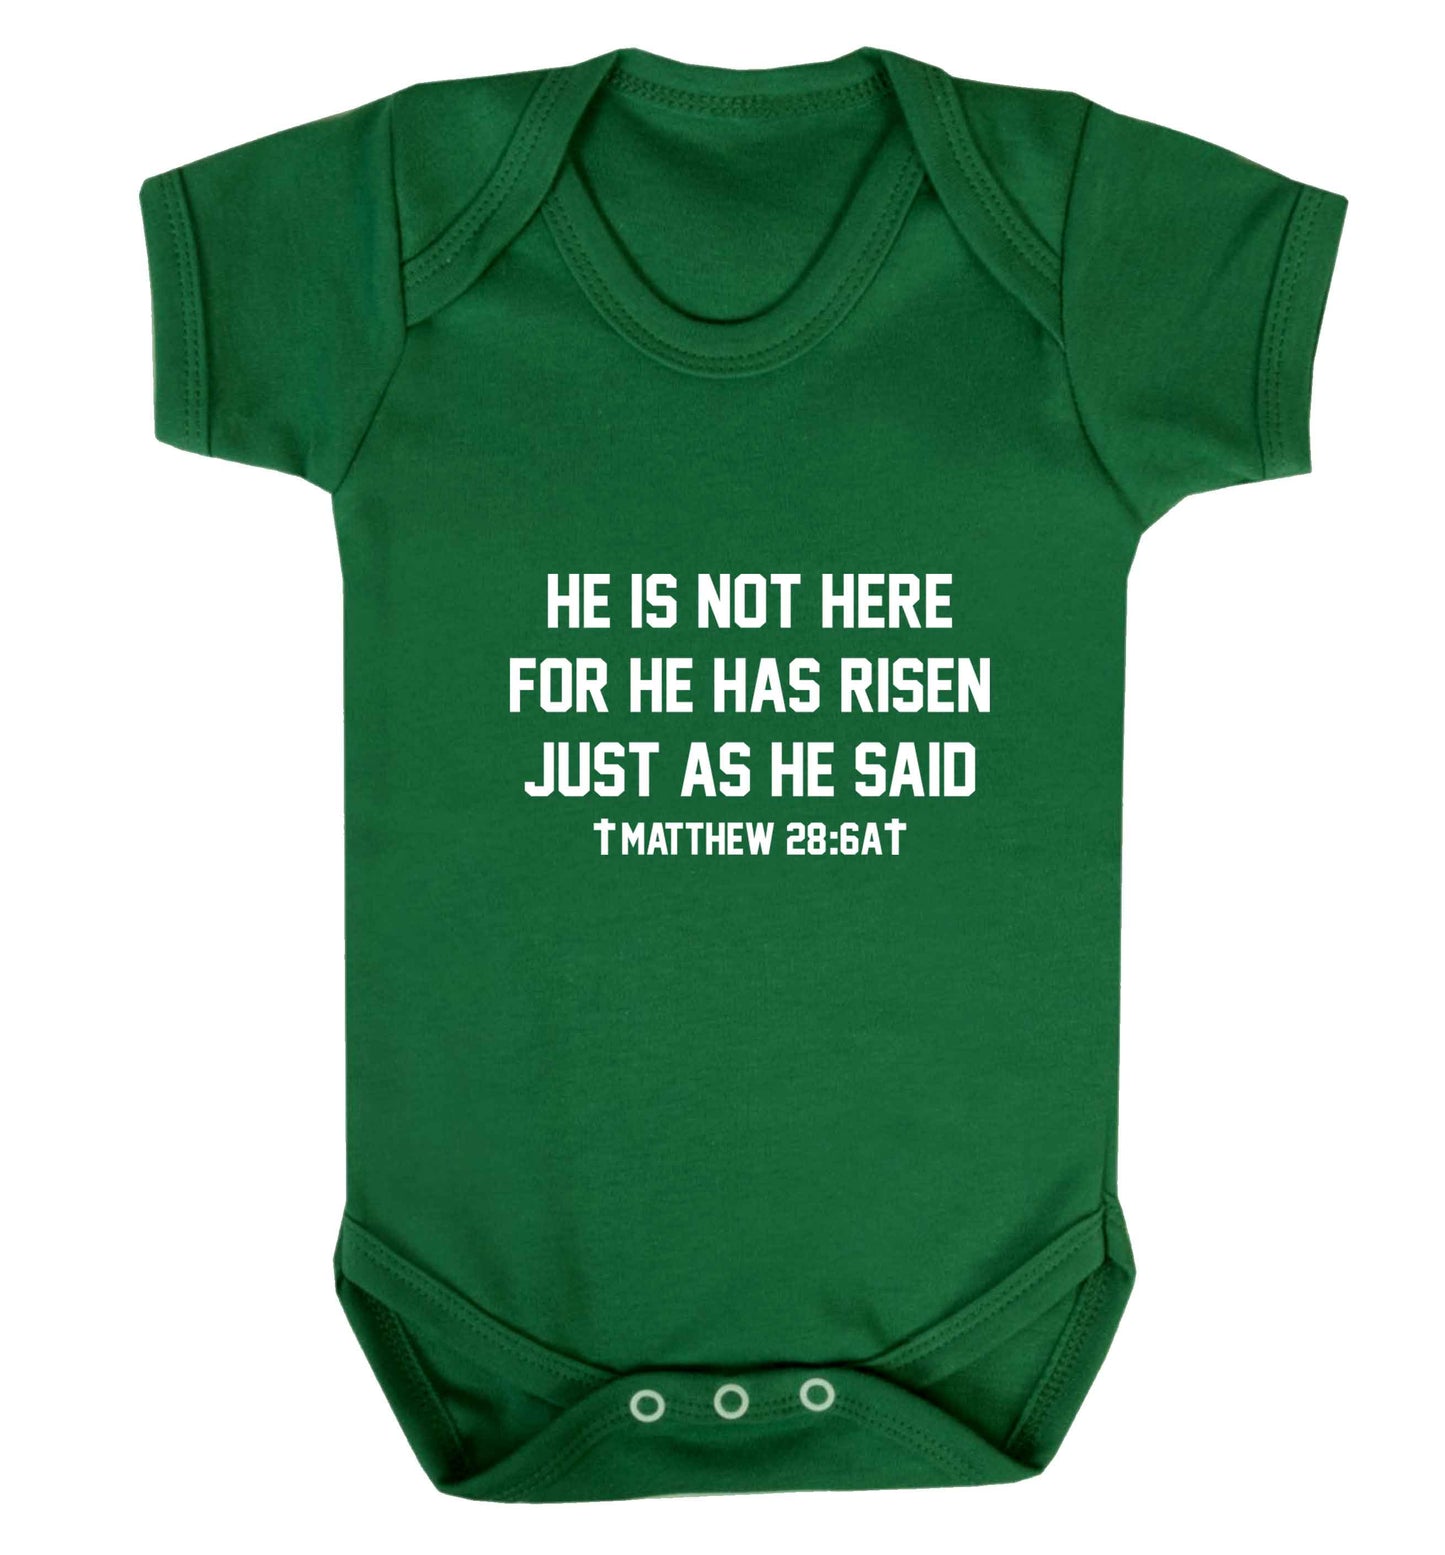 He is not here for he has risen just as he said matthew 28:6A baby vest green 18-24 months